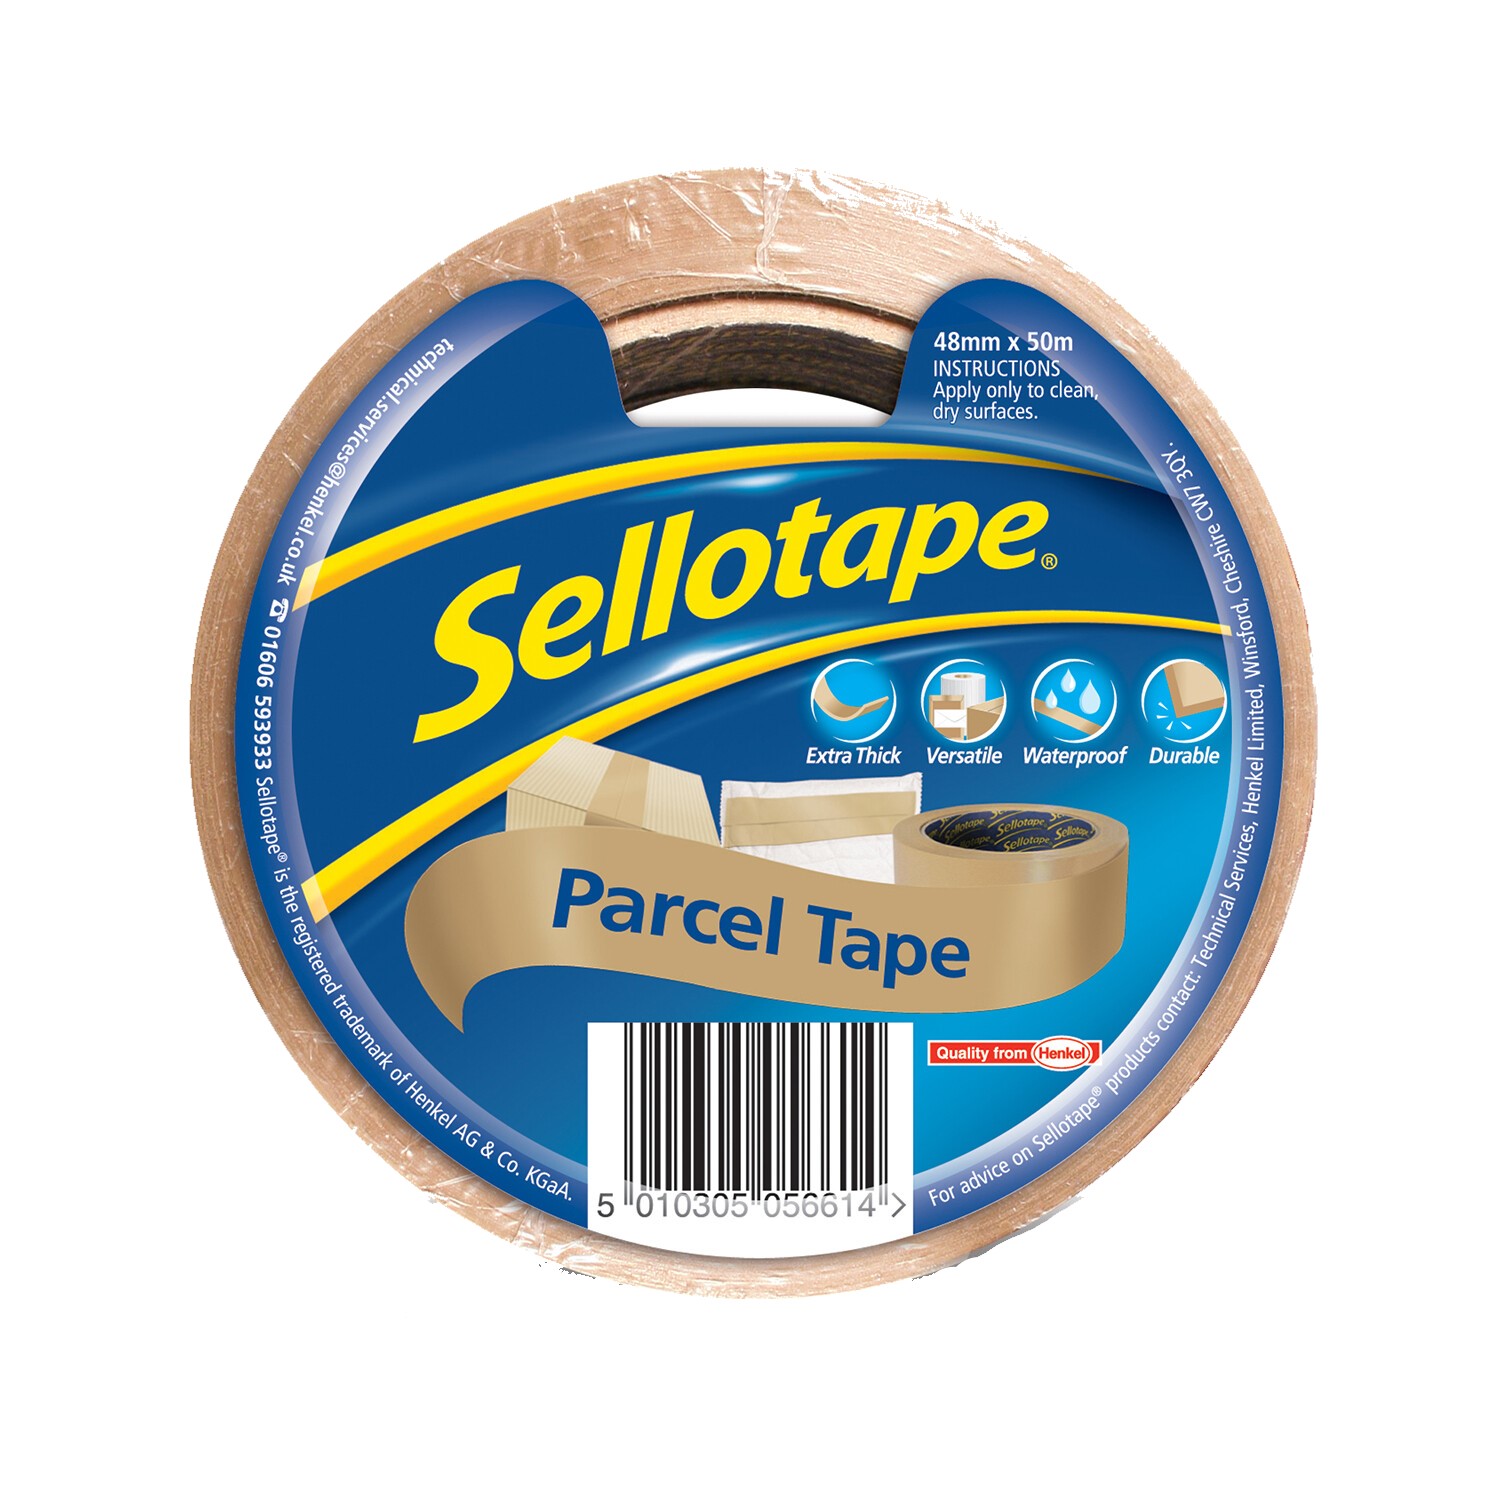 Sellotape Brown Parcel Tape Image